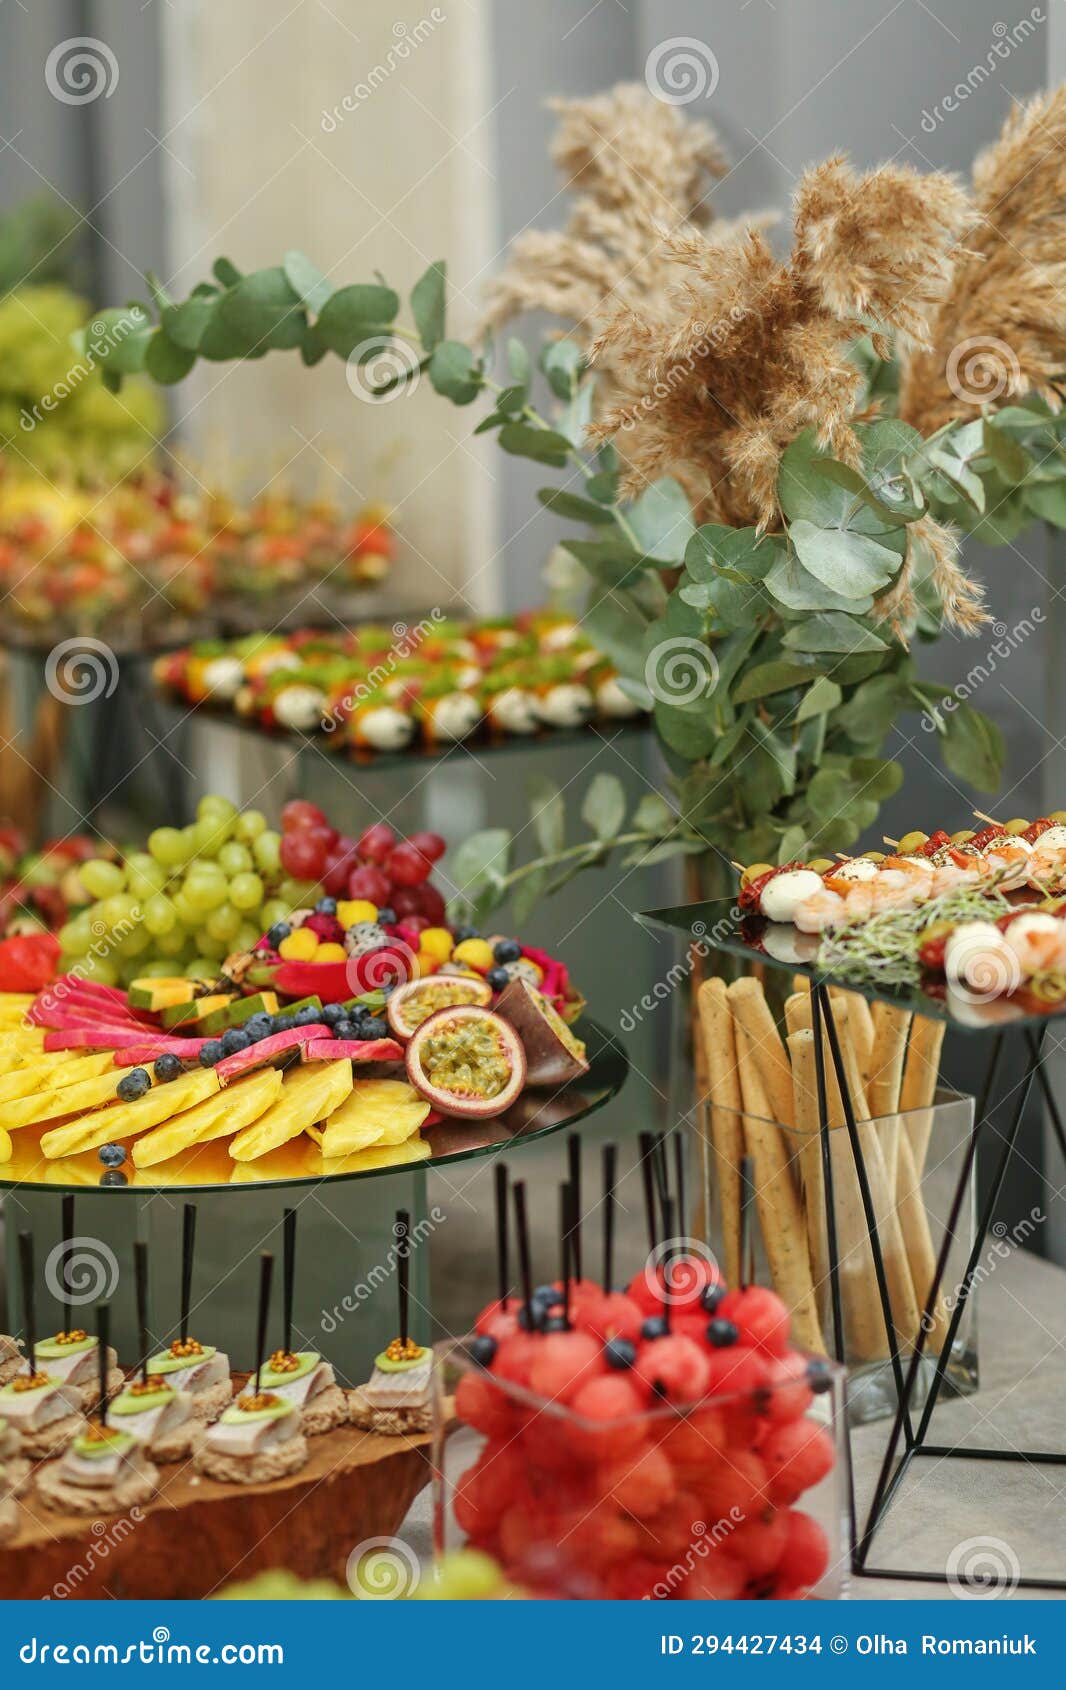 catering buffet table with snacks and appetizers. set of varios fruits and berries. decorative vase